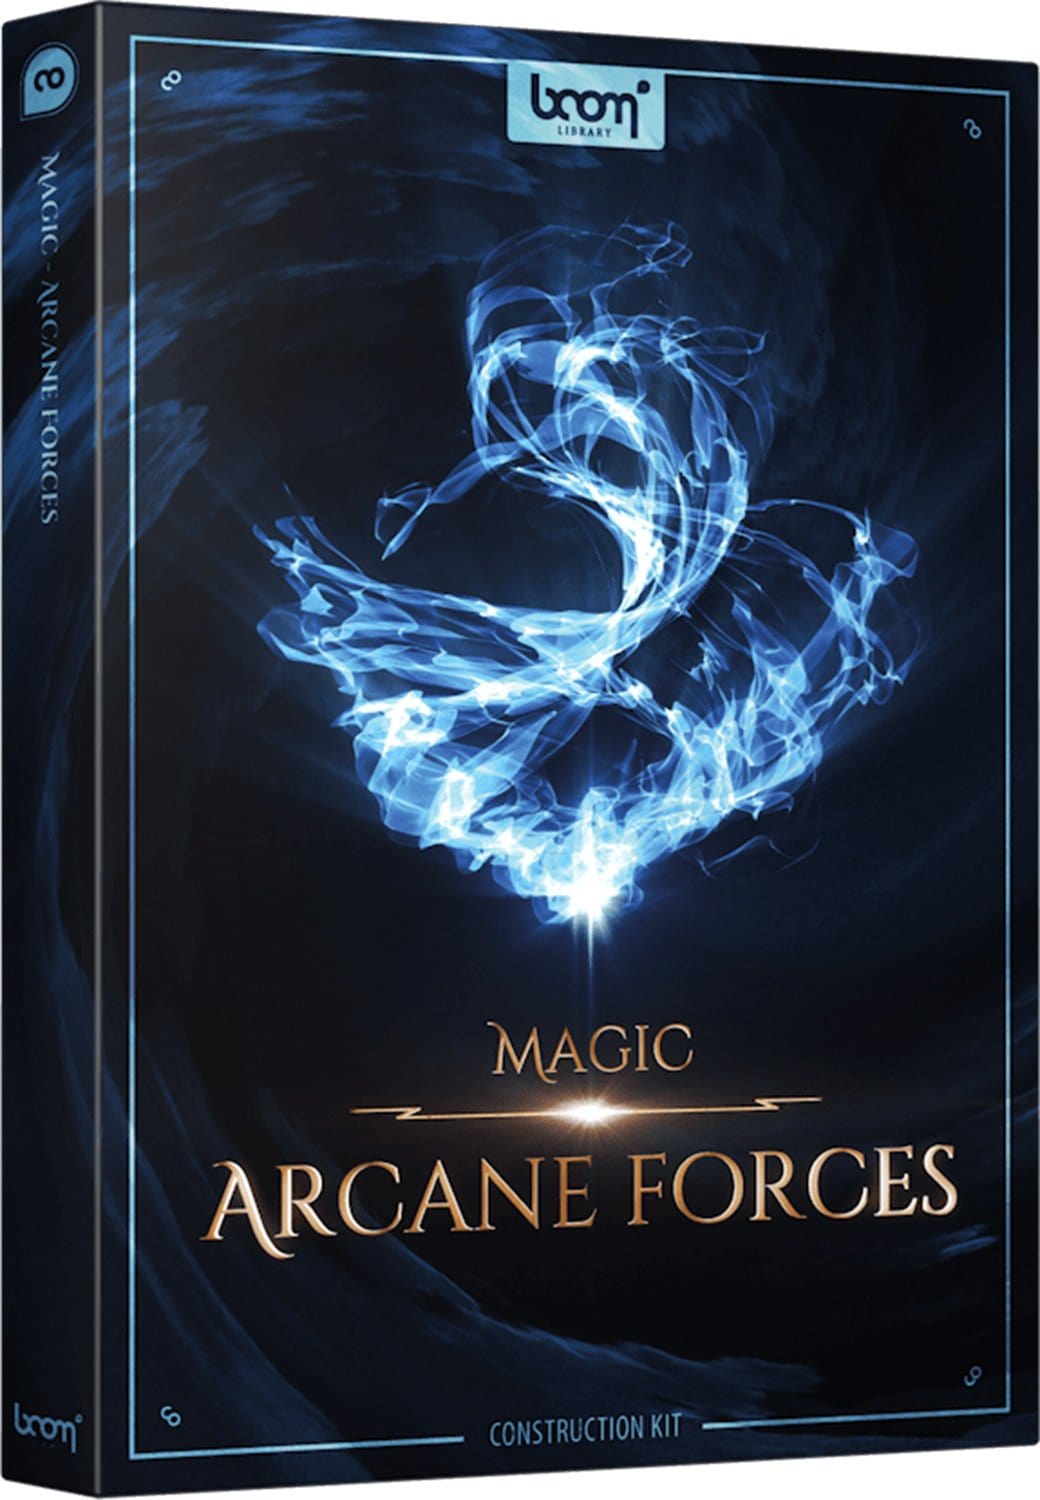 BOOM Magic Arcane Forces Construction Kit Sound Effects - PSSL ProSound and Stage Lighting